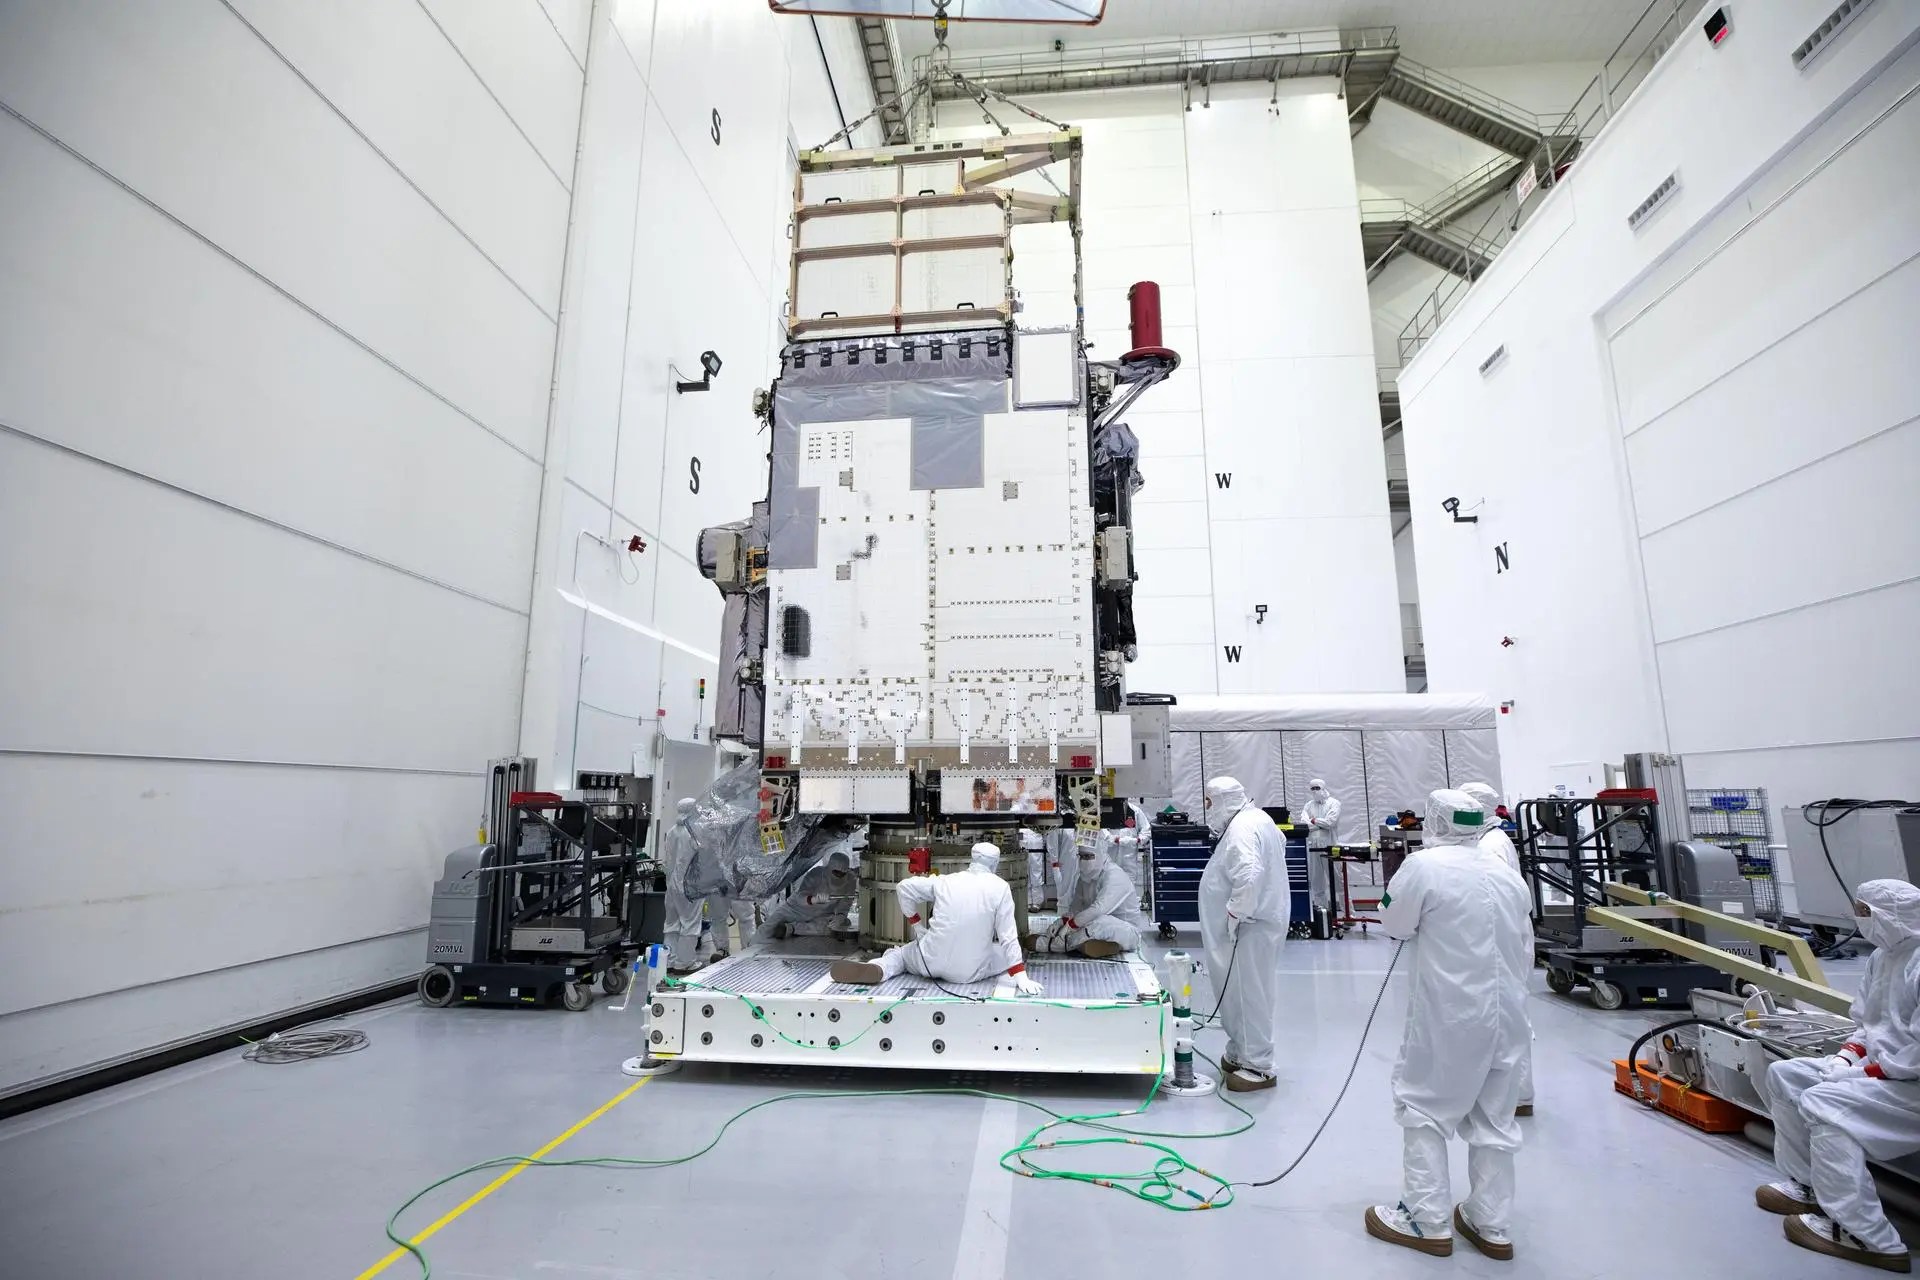 Image shows technicians in 'bunny suits' working on a GOES satellite in a clean room.